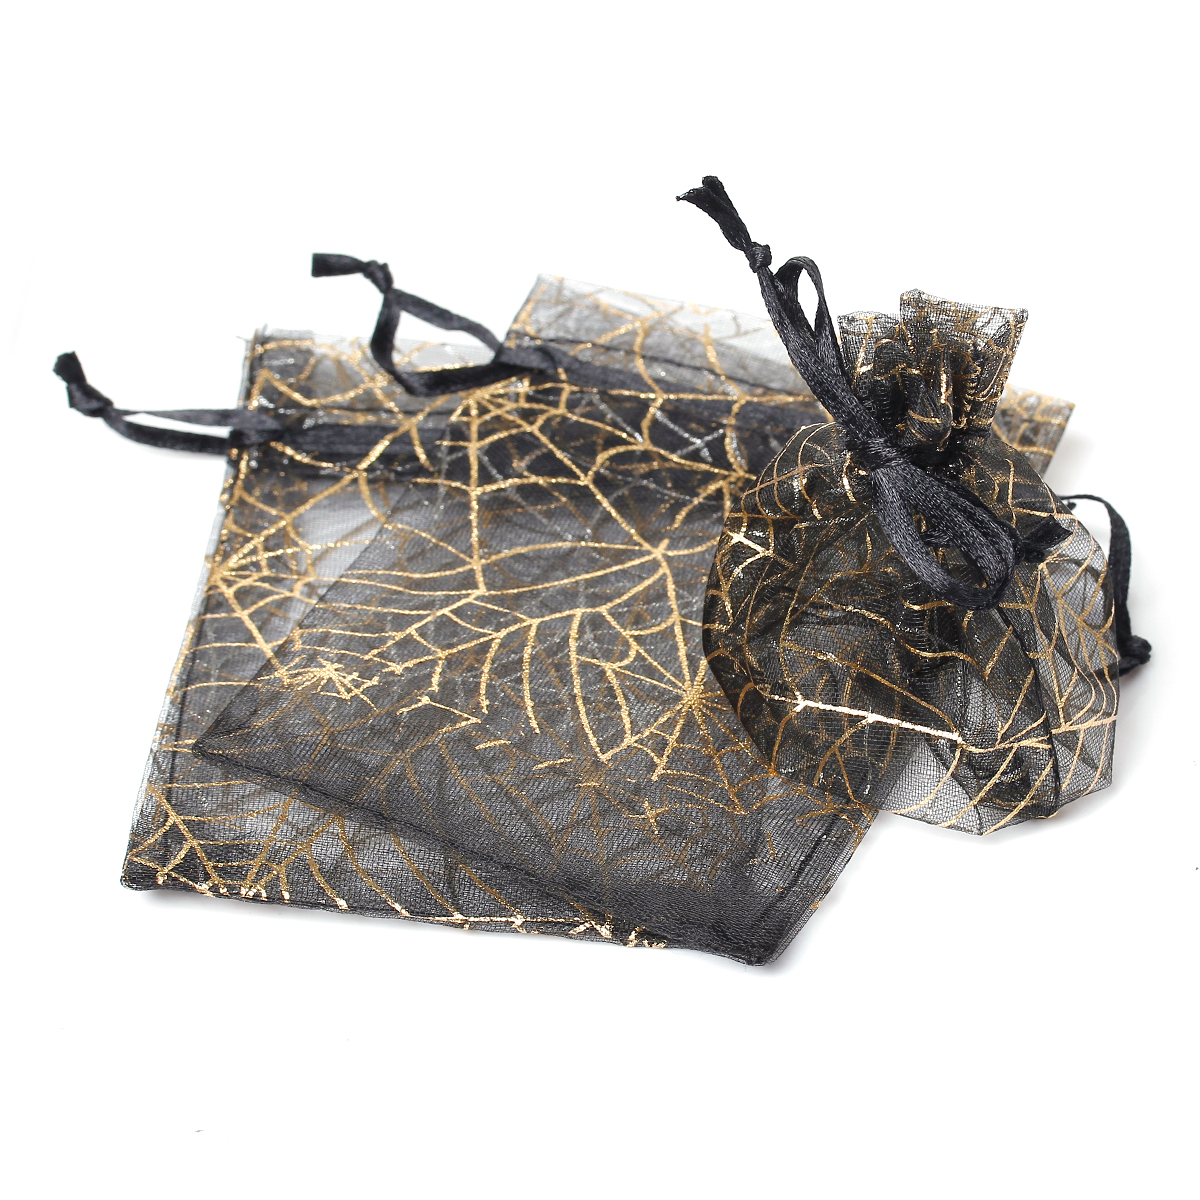 Picture of Wedding Gift Organza Jewelry Bags Drawstring Rectangle Black Spider Web Pattern 11cm x8.5cm(4 3/8" x3 3/8"), 50 PCs